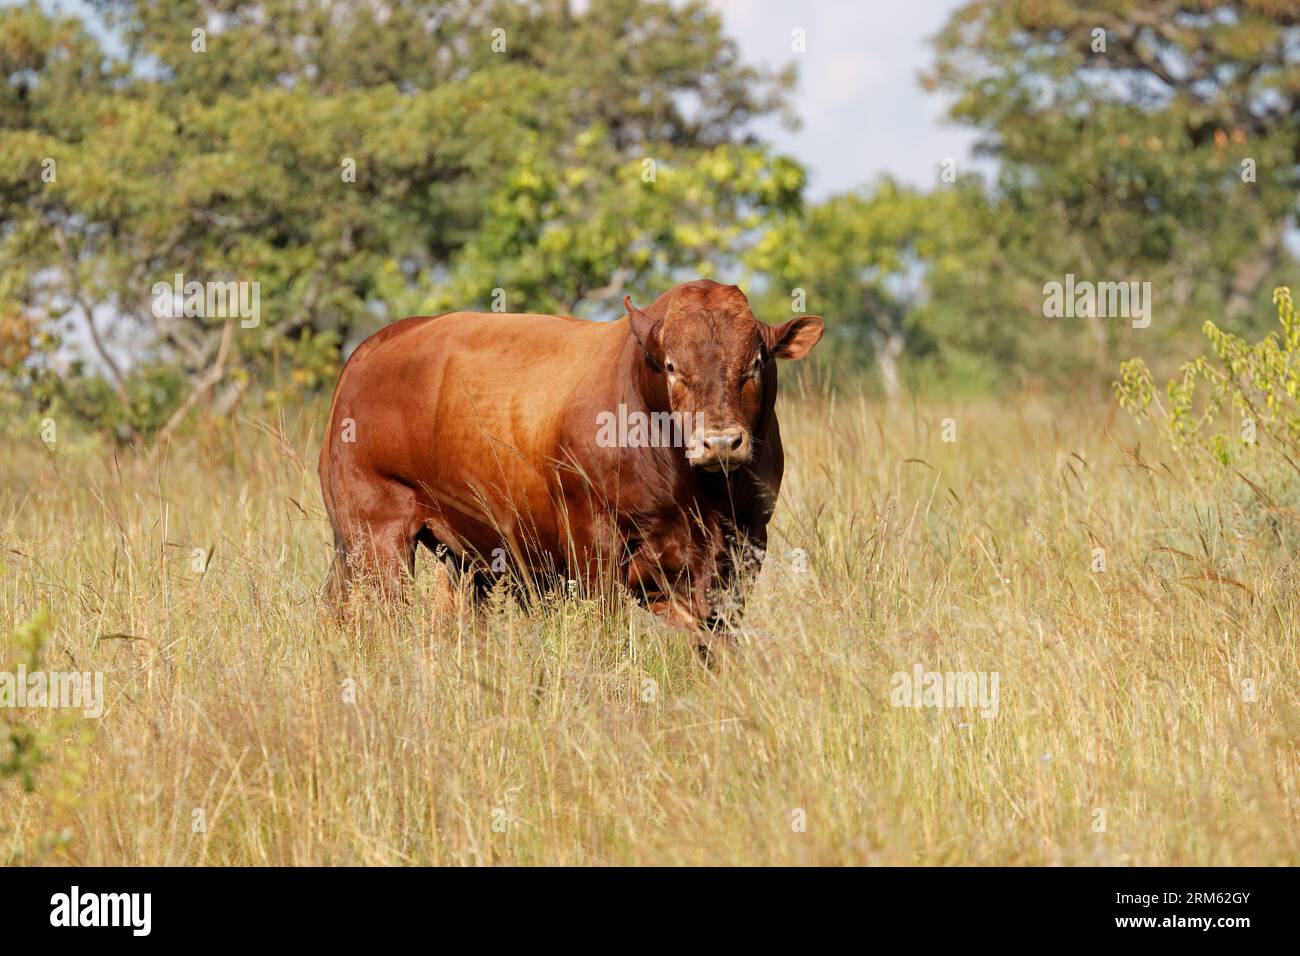 A free-range bull in native grassland on a rural farm, South Africa Stock Photo